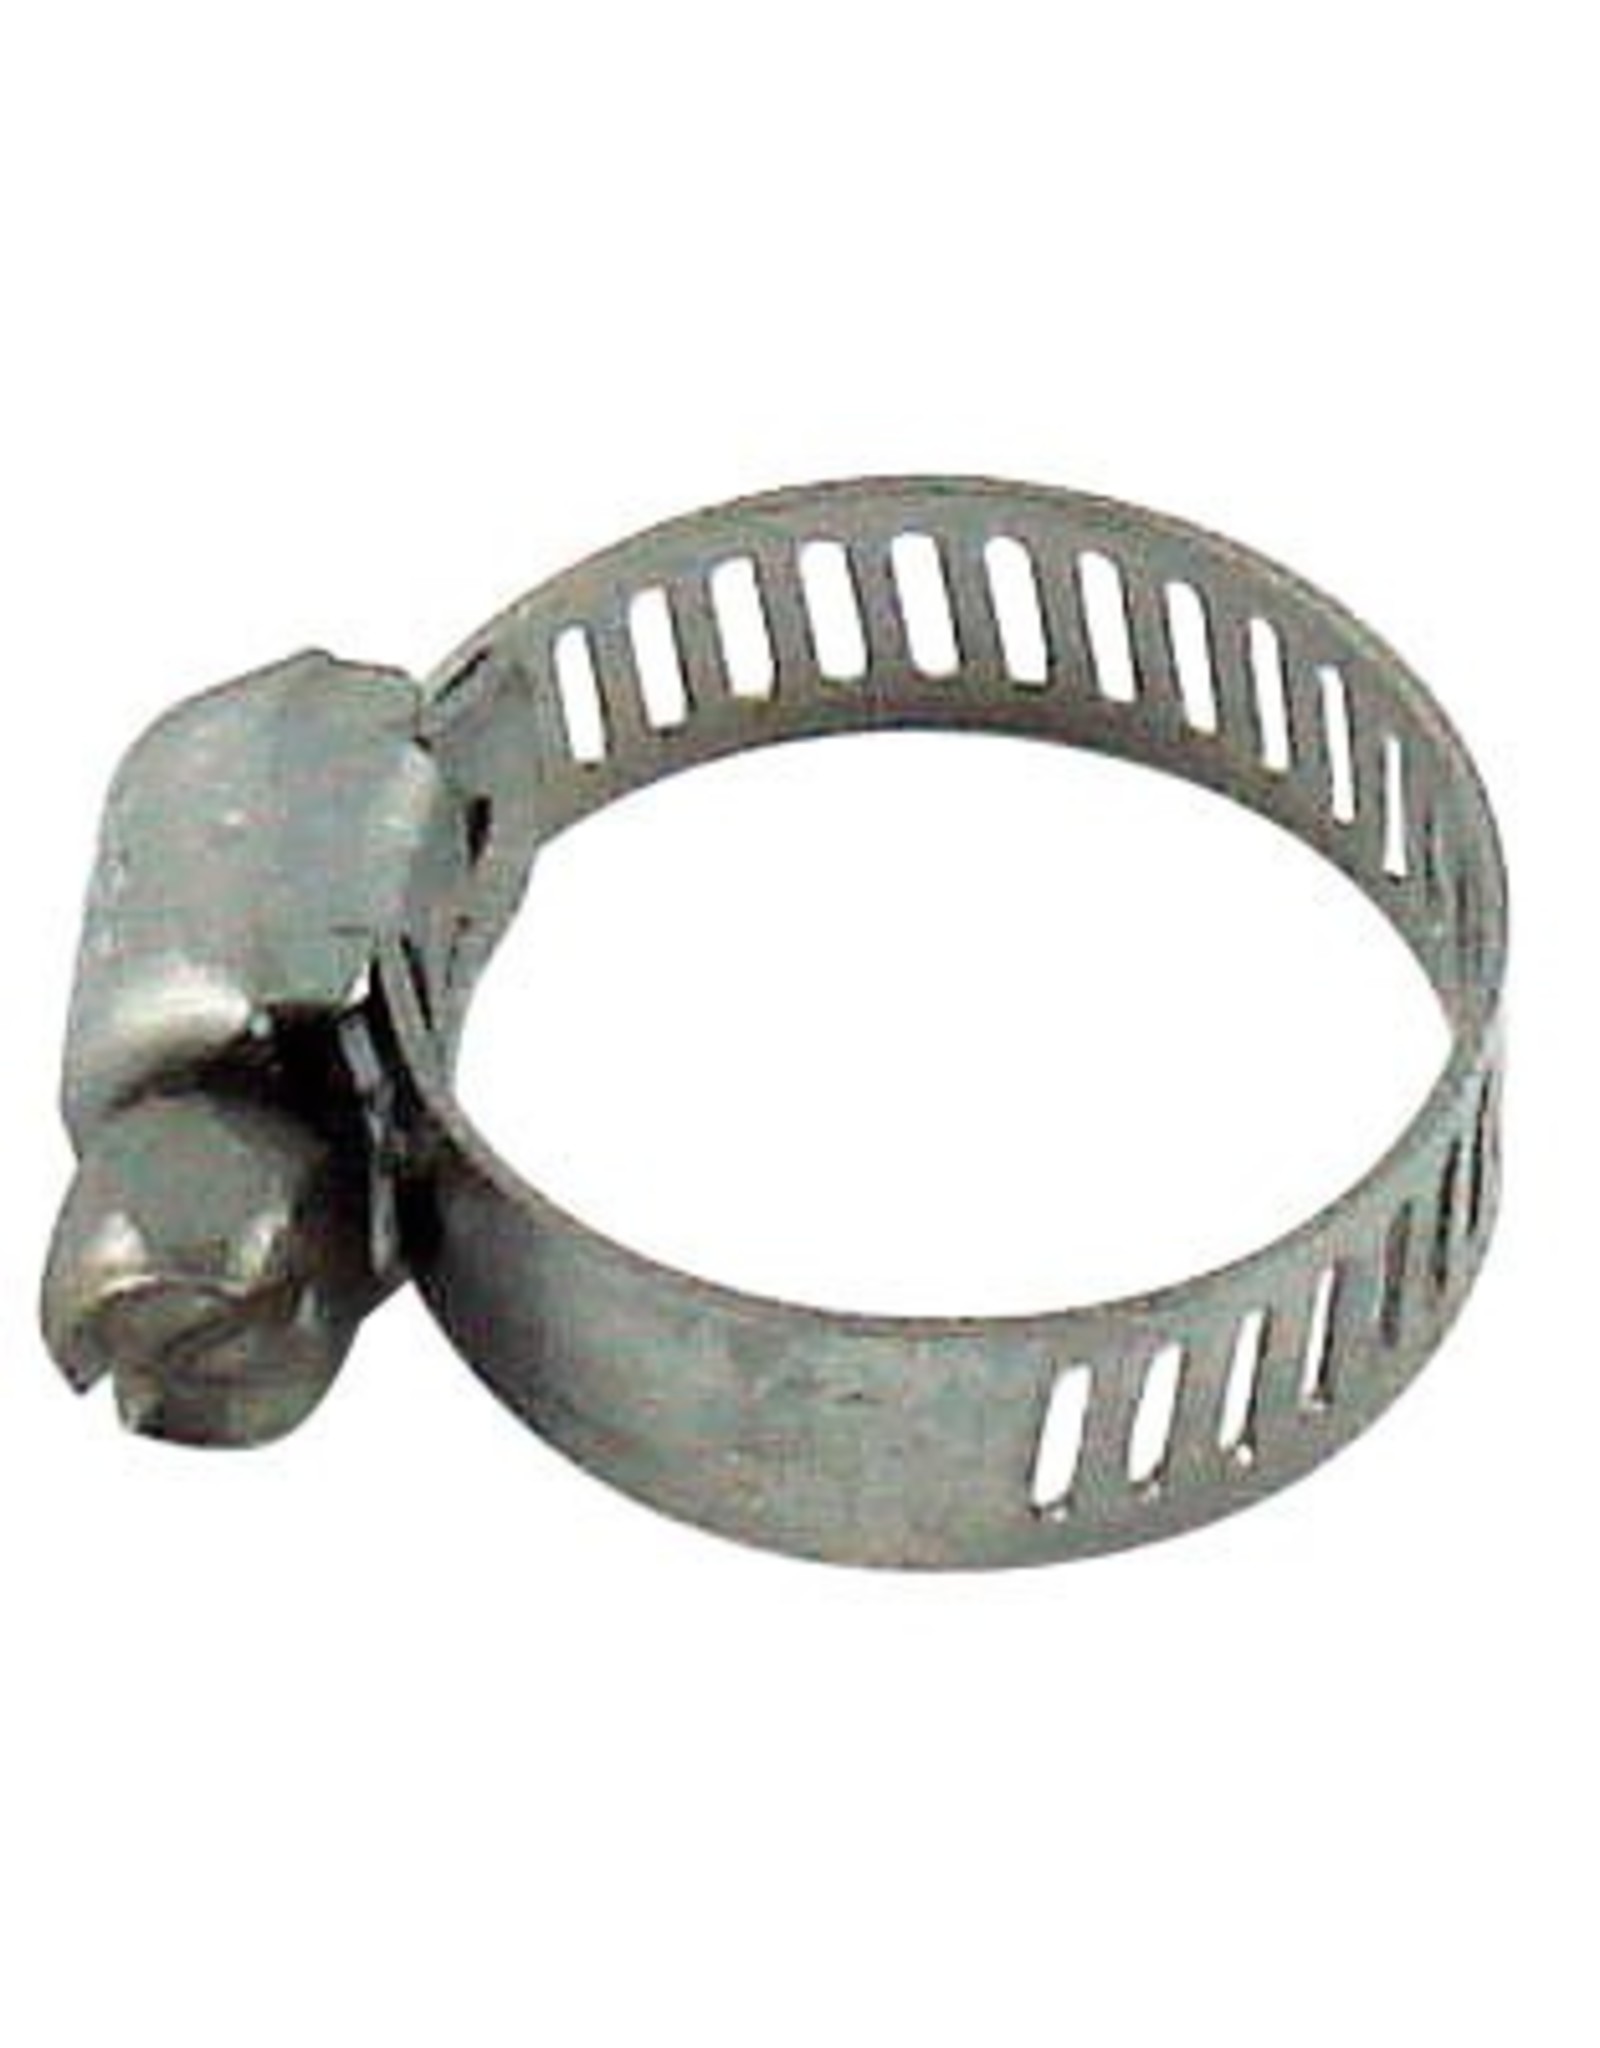 Hose Clamp - Large Worm Stainless lwc